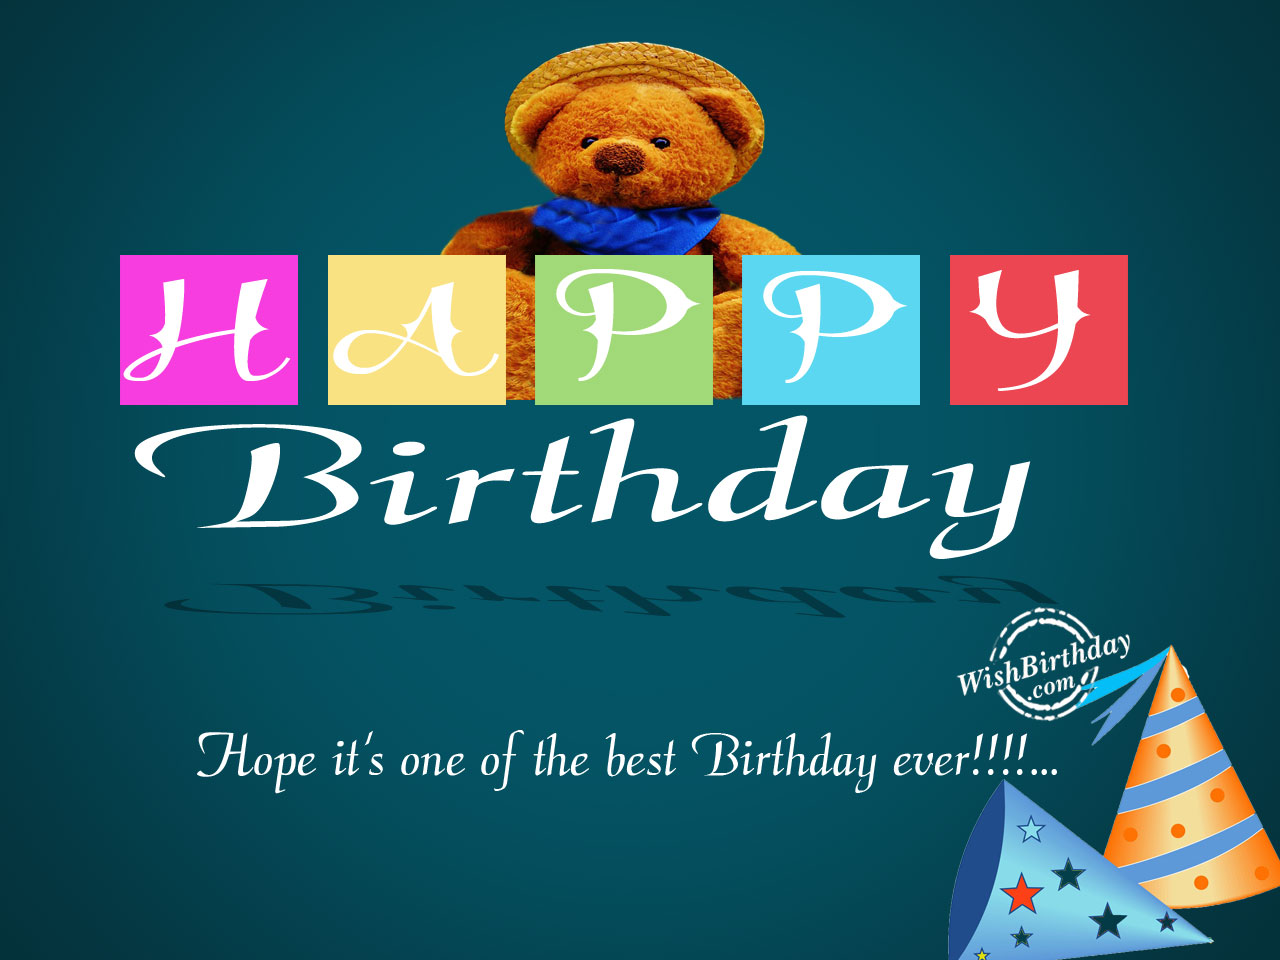 Birthday Wishes With Teddy Bear - Birthday Wishes, Happy Birthday Pictures